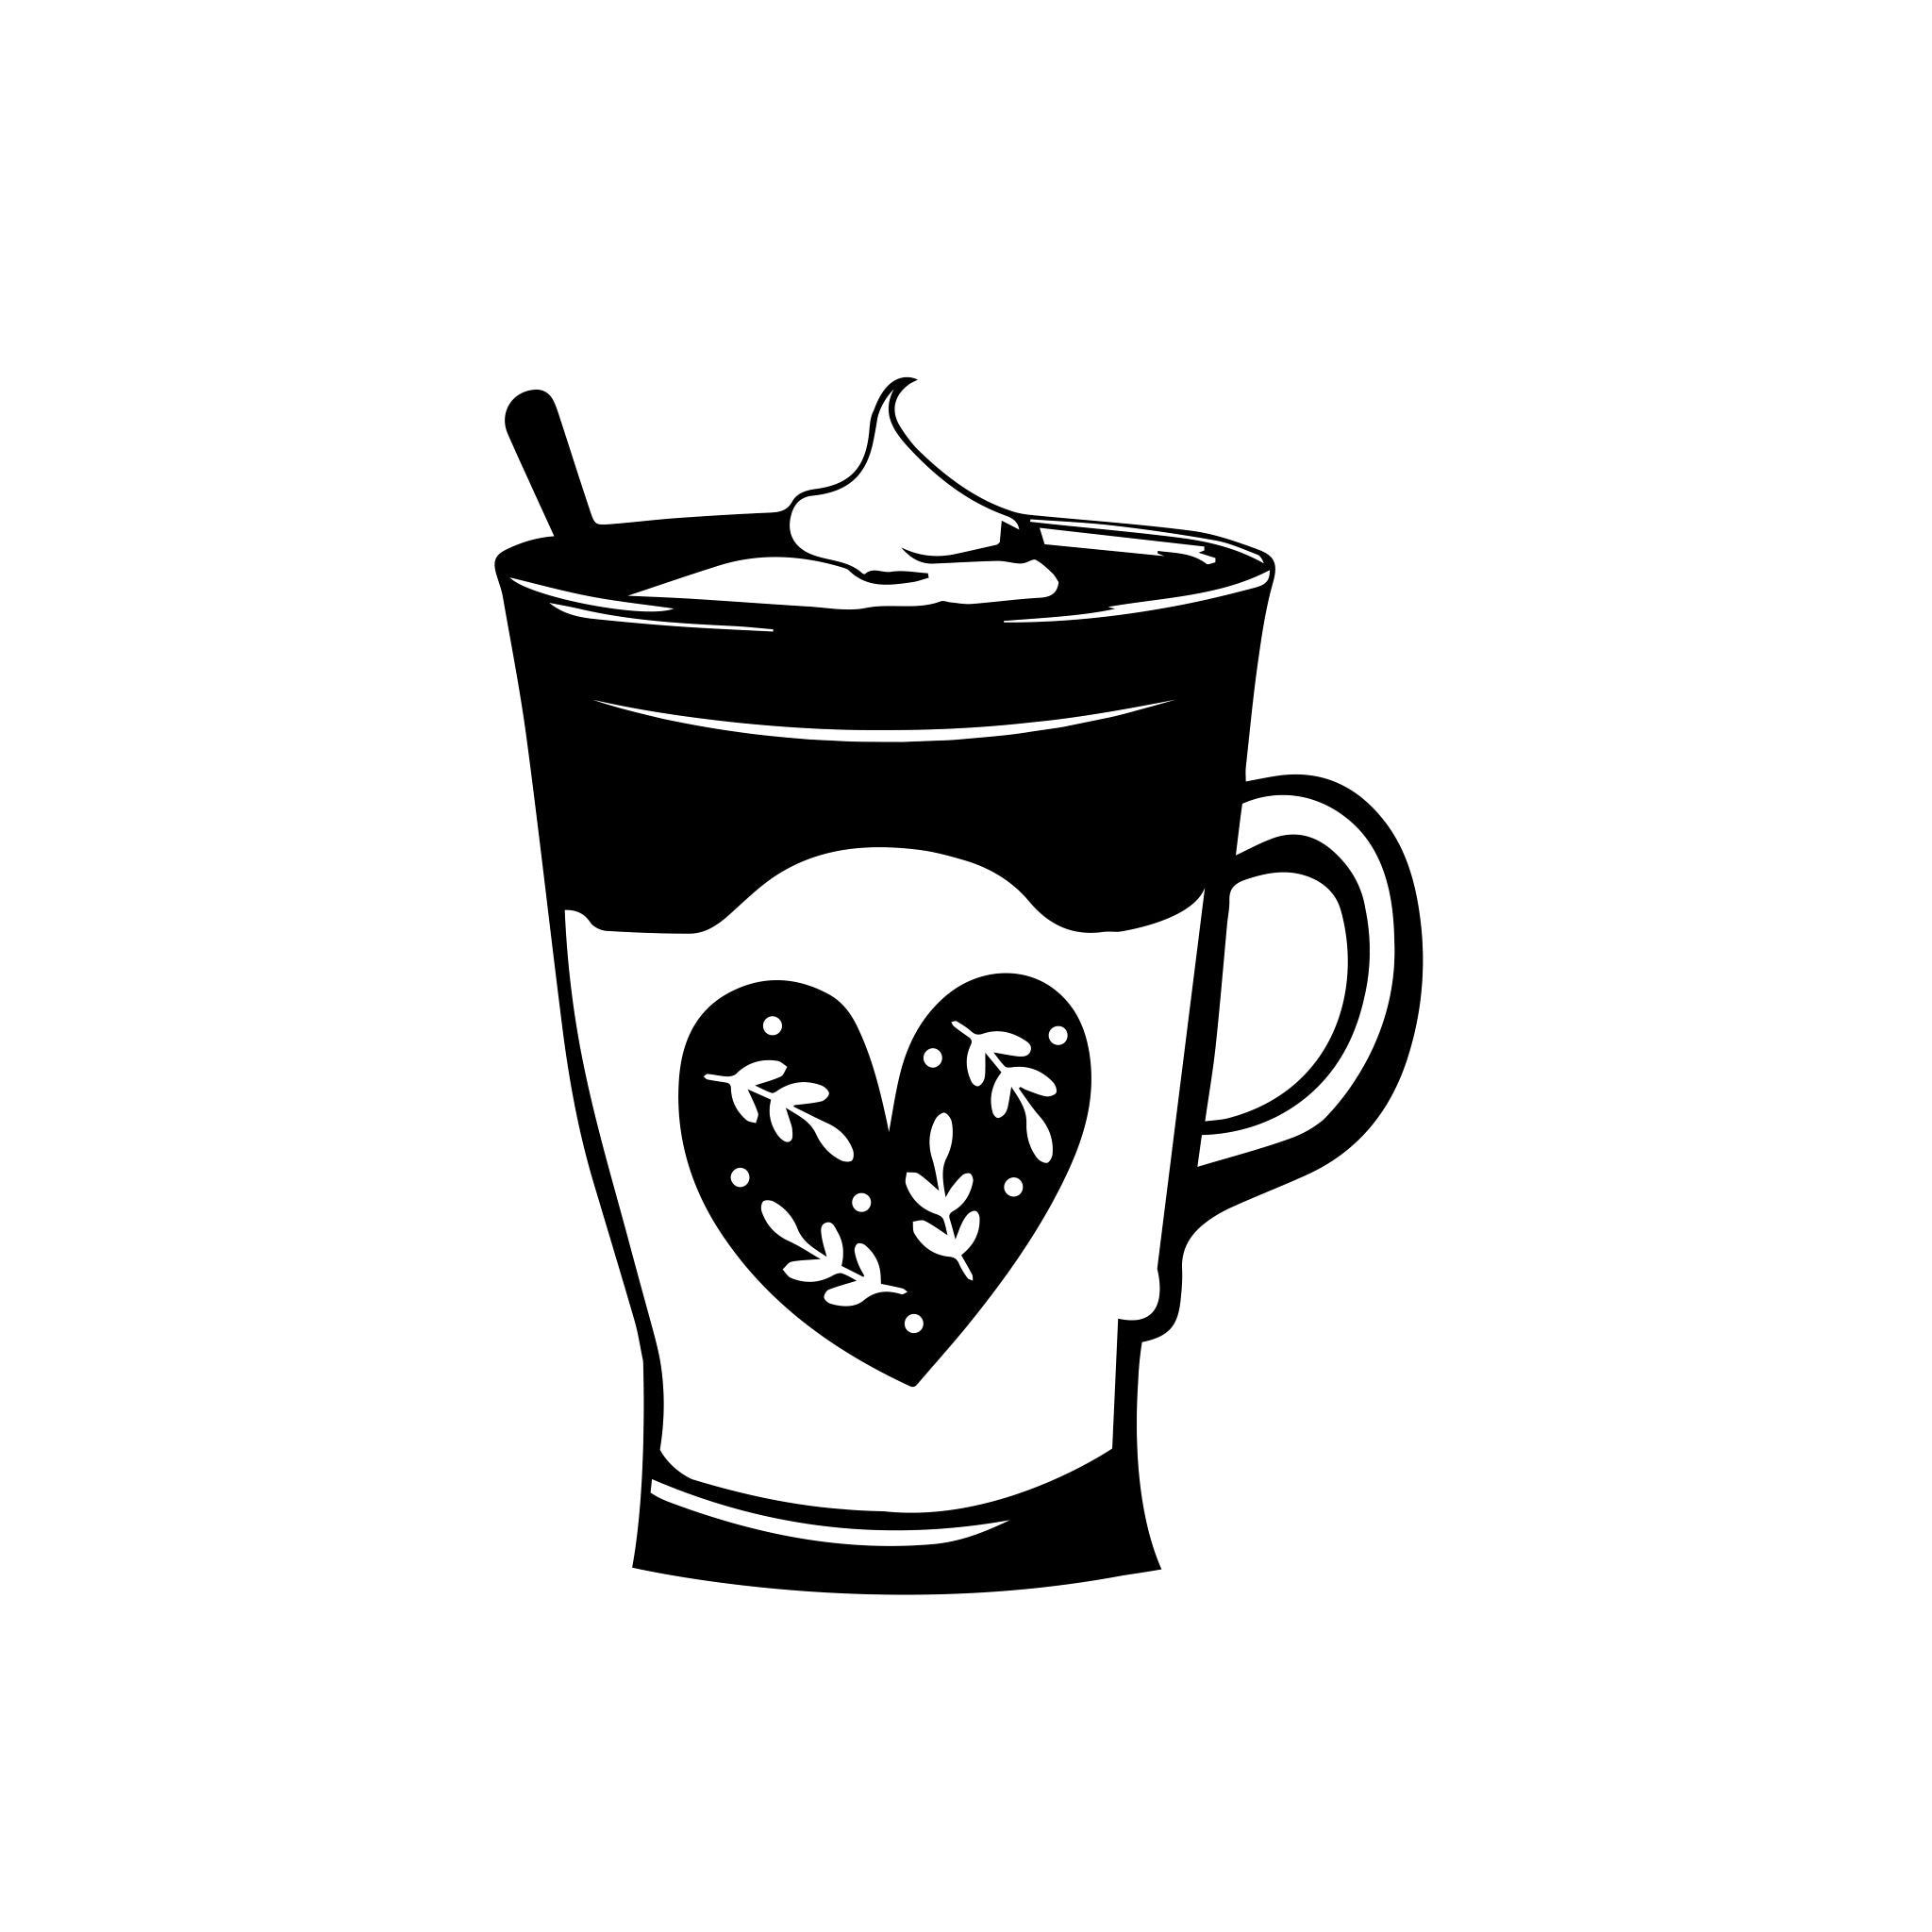 hot chocolate clipart black and white